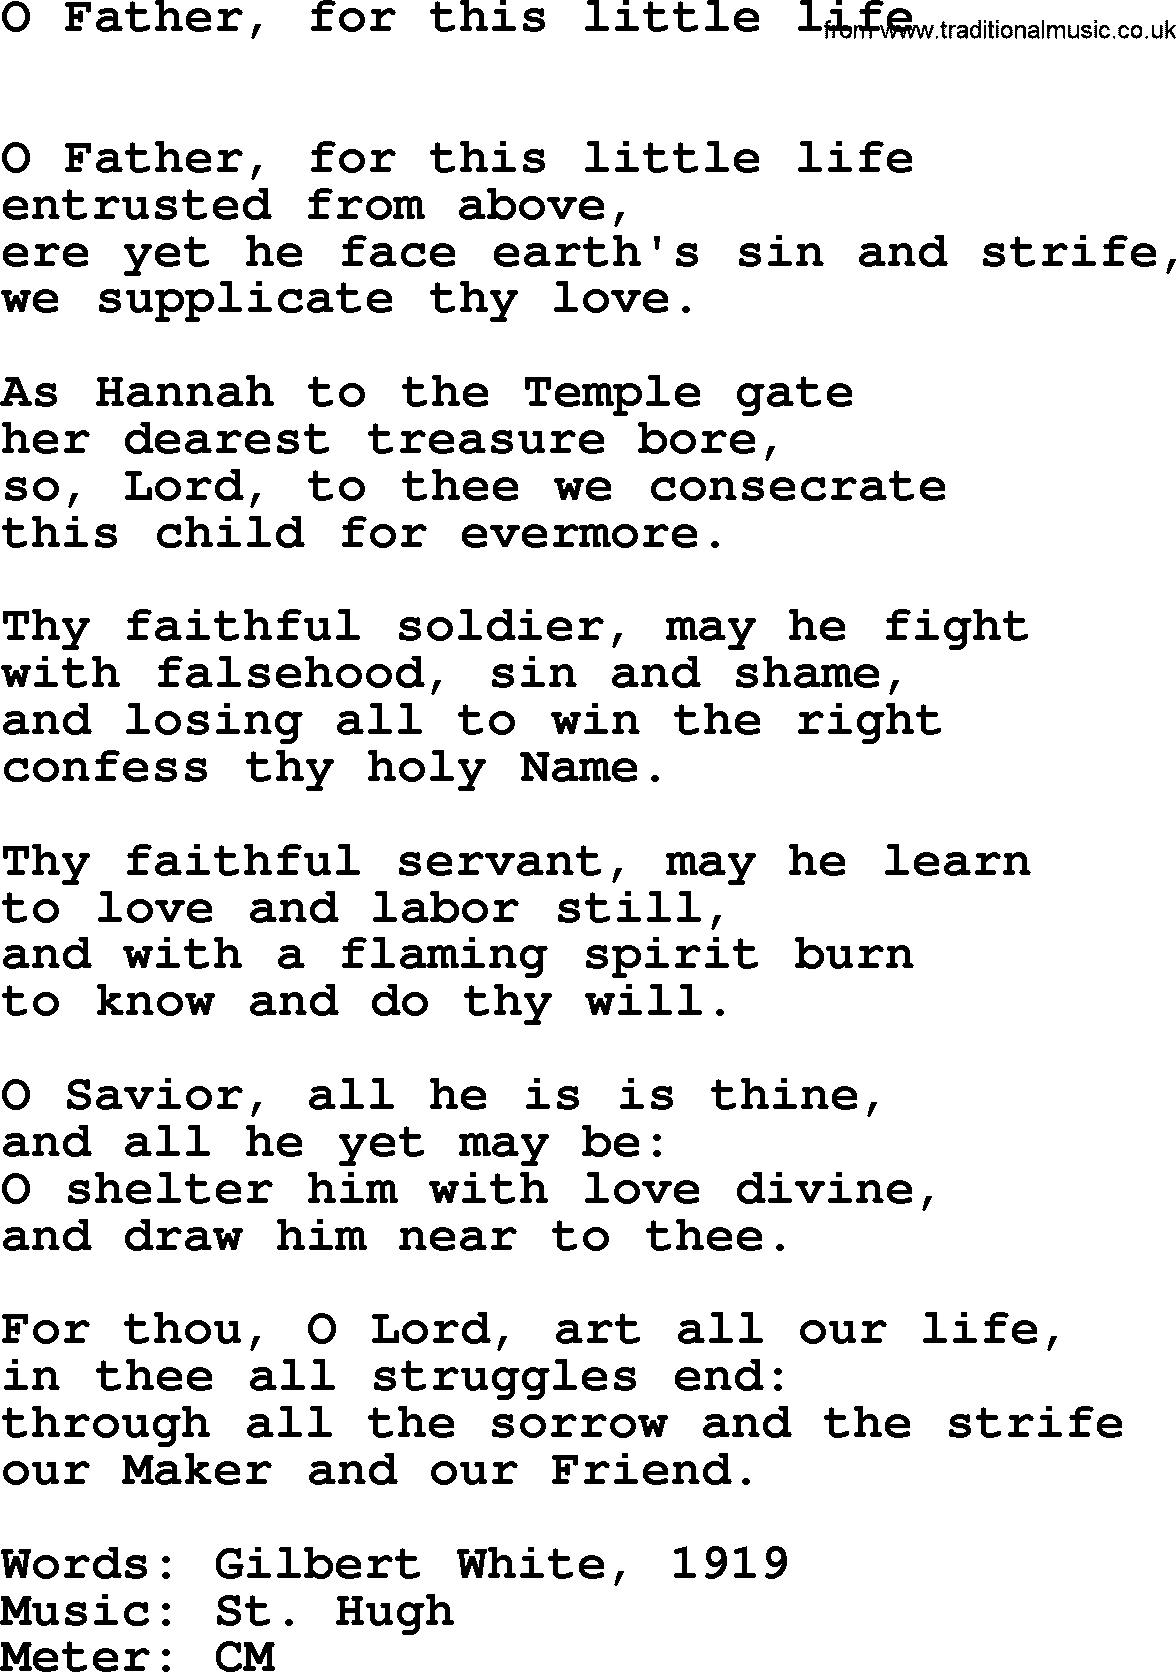 Hymns Ancient and Modern Hymn: O Father, For This Little Life, lyrics with midi music